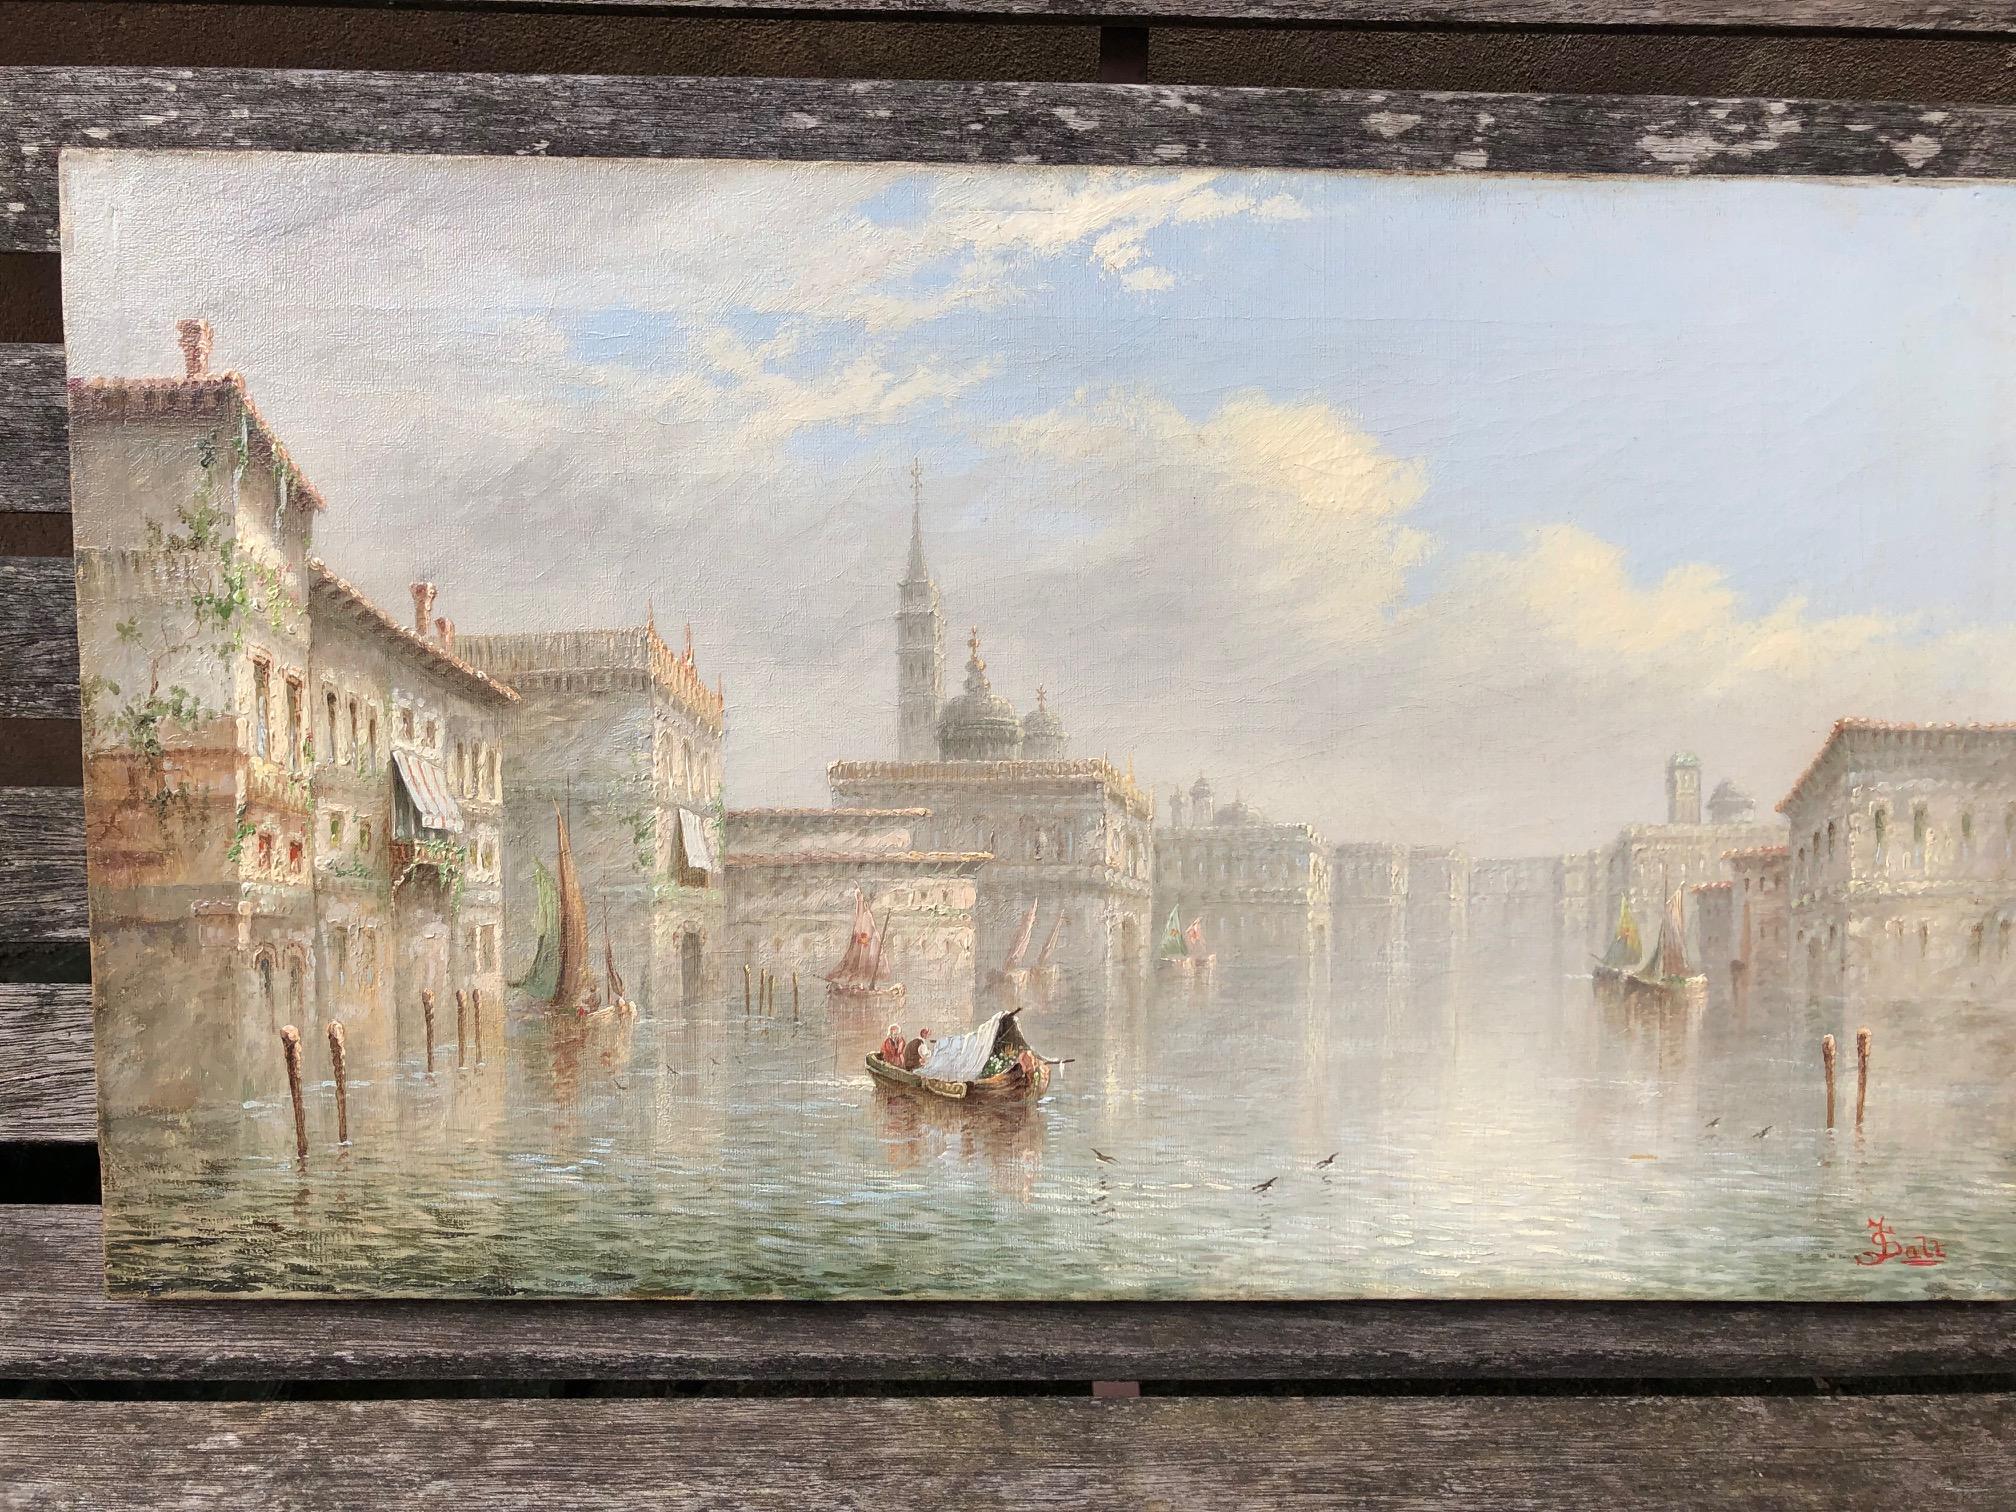 James Salt
British 1850 - 1903
James Salt was a British 19th century painter who painted almost exclusively romantic scenes of Venice.
This enchanting oil on canvas painting is of a 'Venetian Capriccio' Signed; James Salt.  As a specialist in these